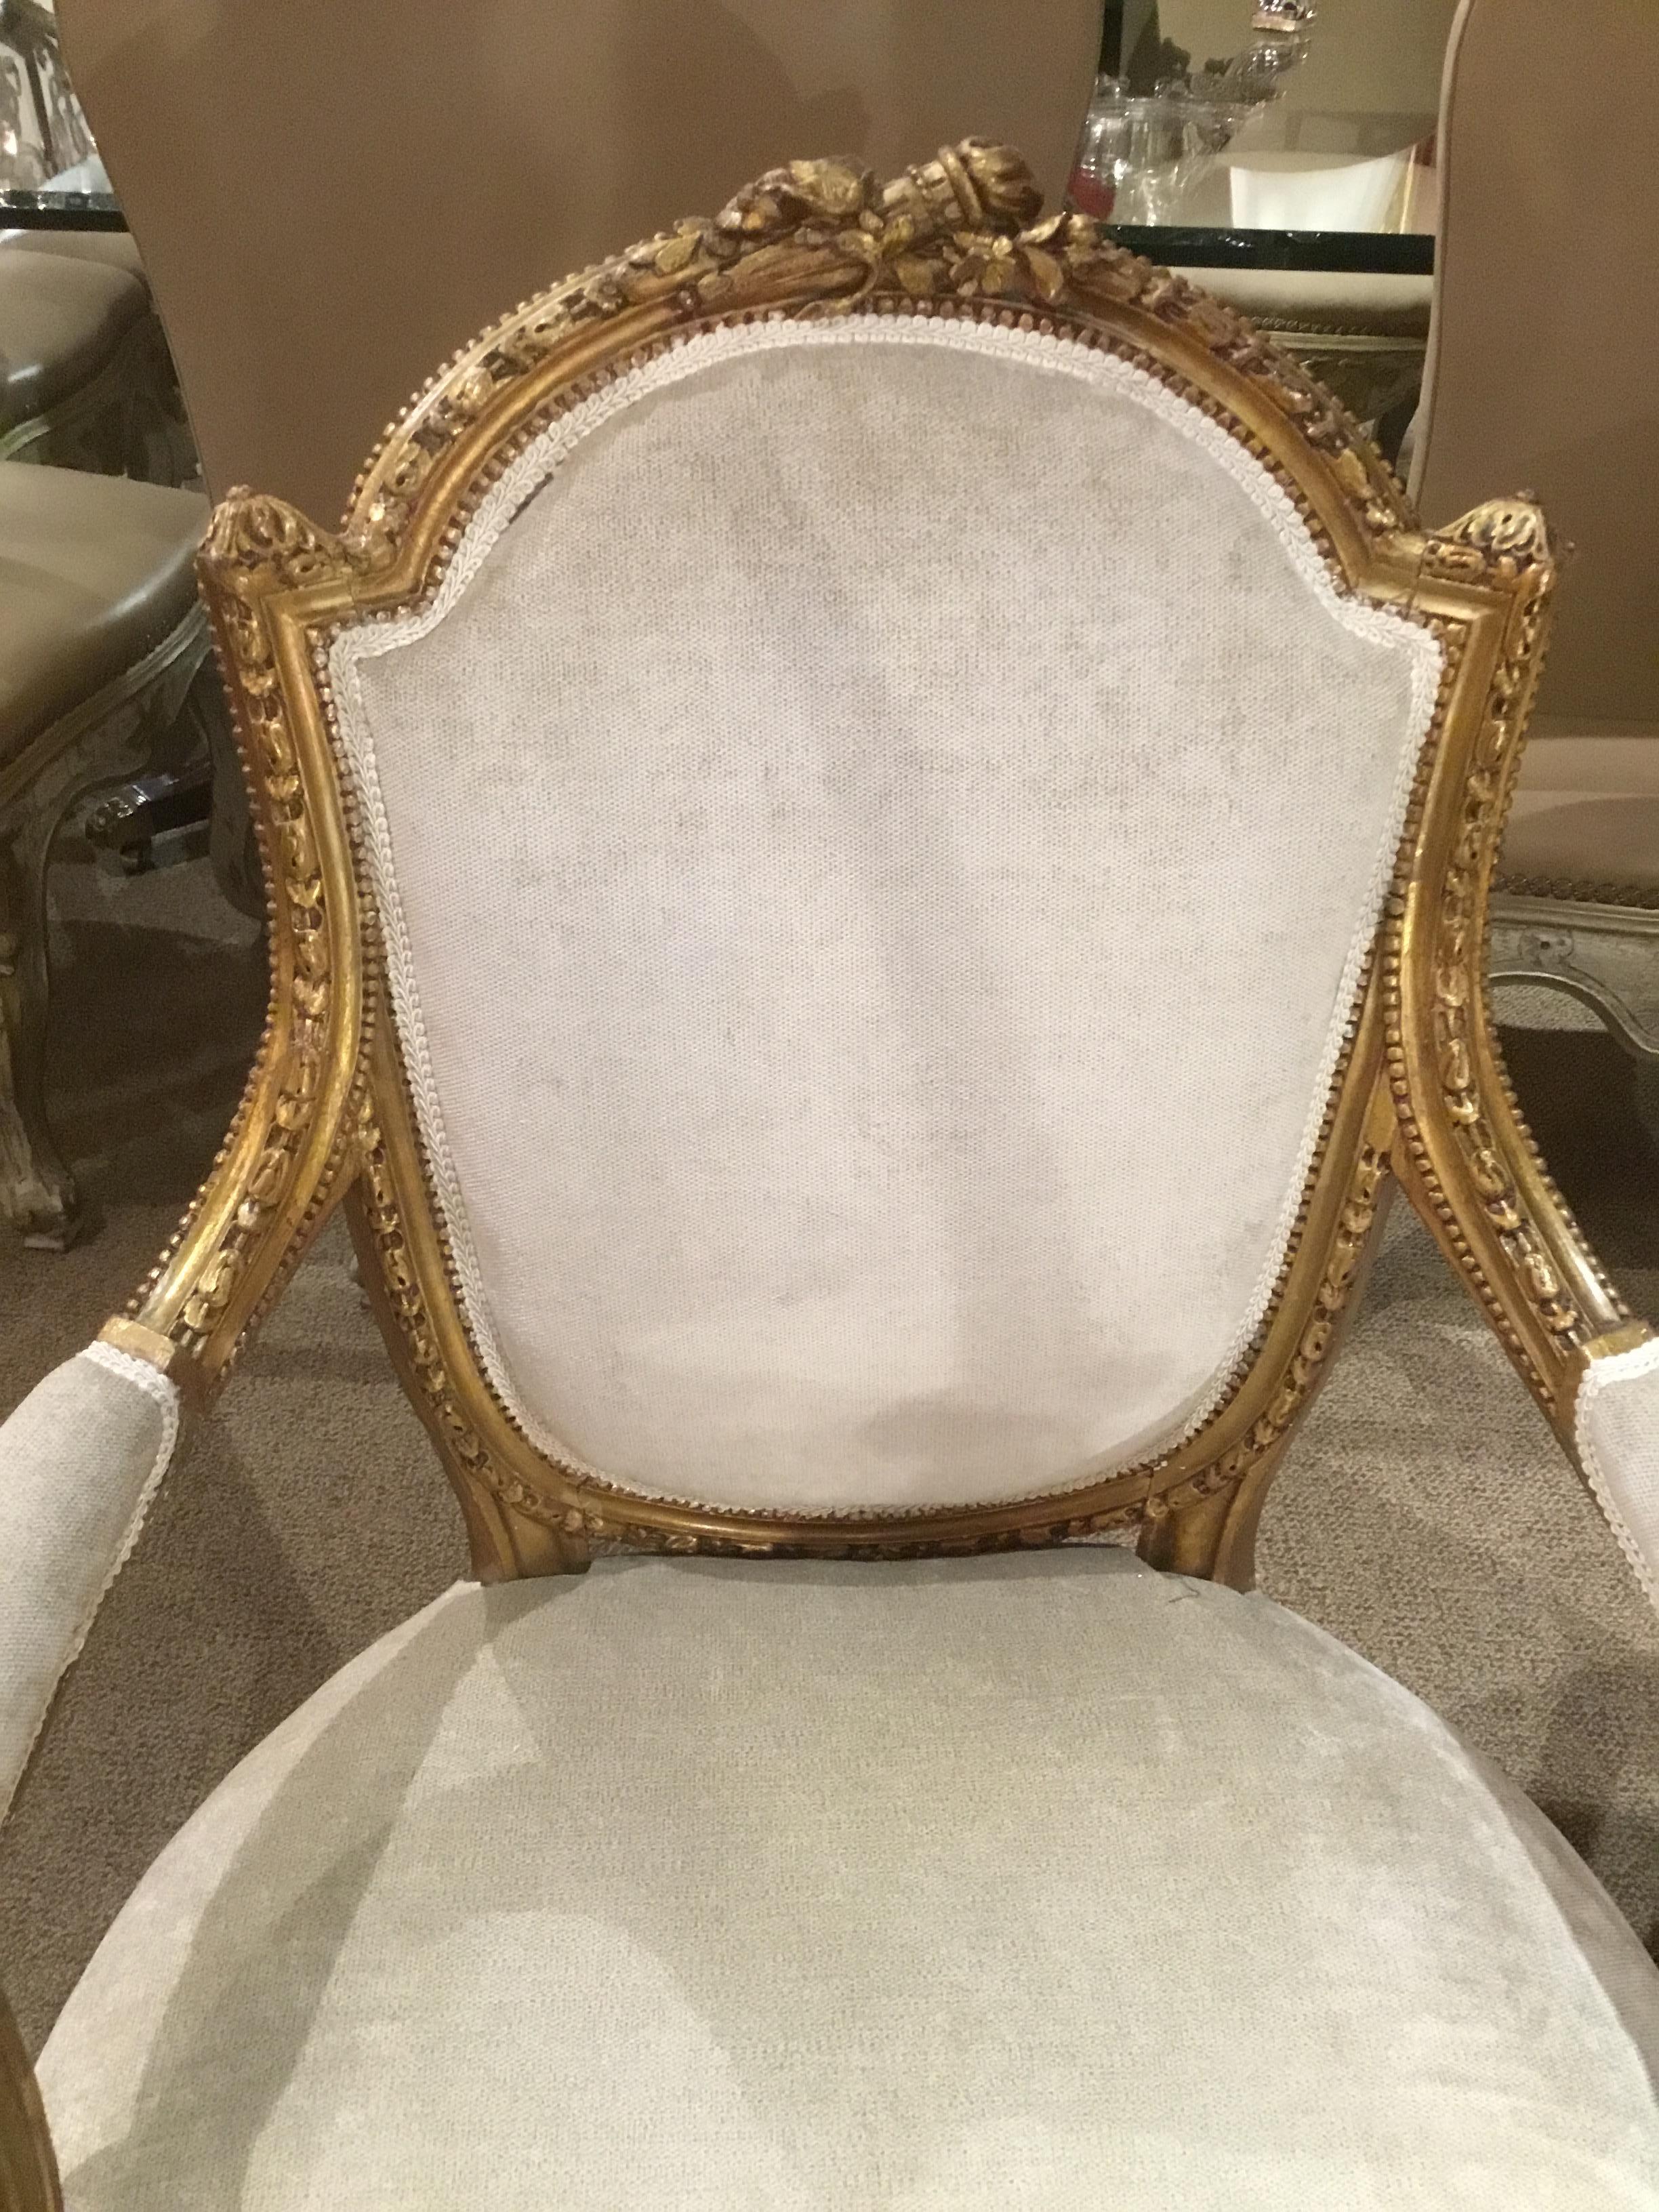 French Louis XVI style giltwood chairs with a flamed torch and foliate 
Design at the crest of these chairs. A carved and reeded leg is featured.